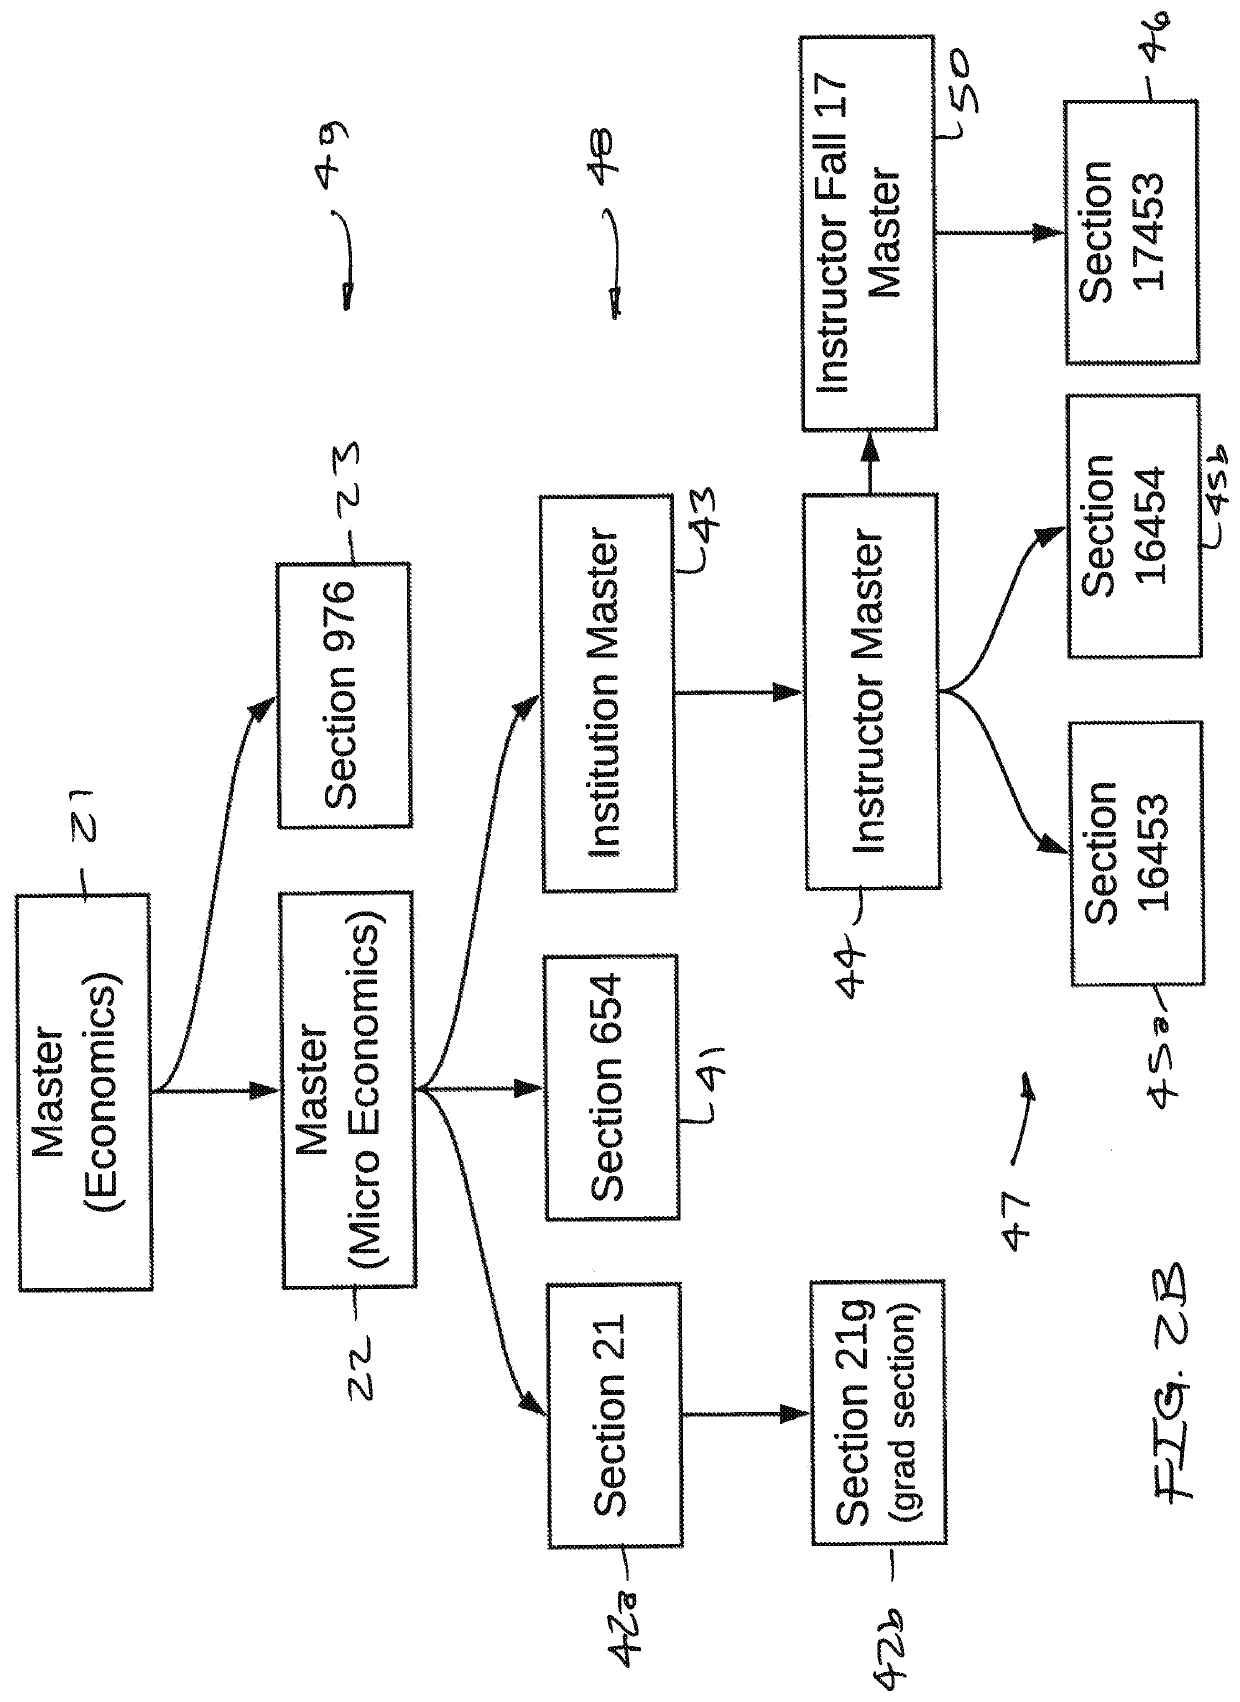 Systems and methods for producing incremental revised content